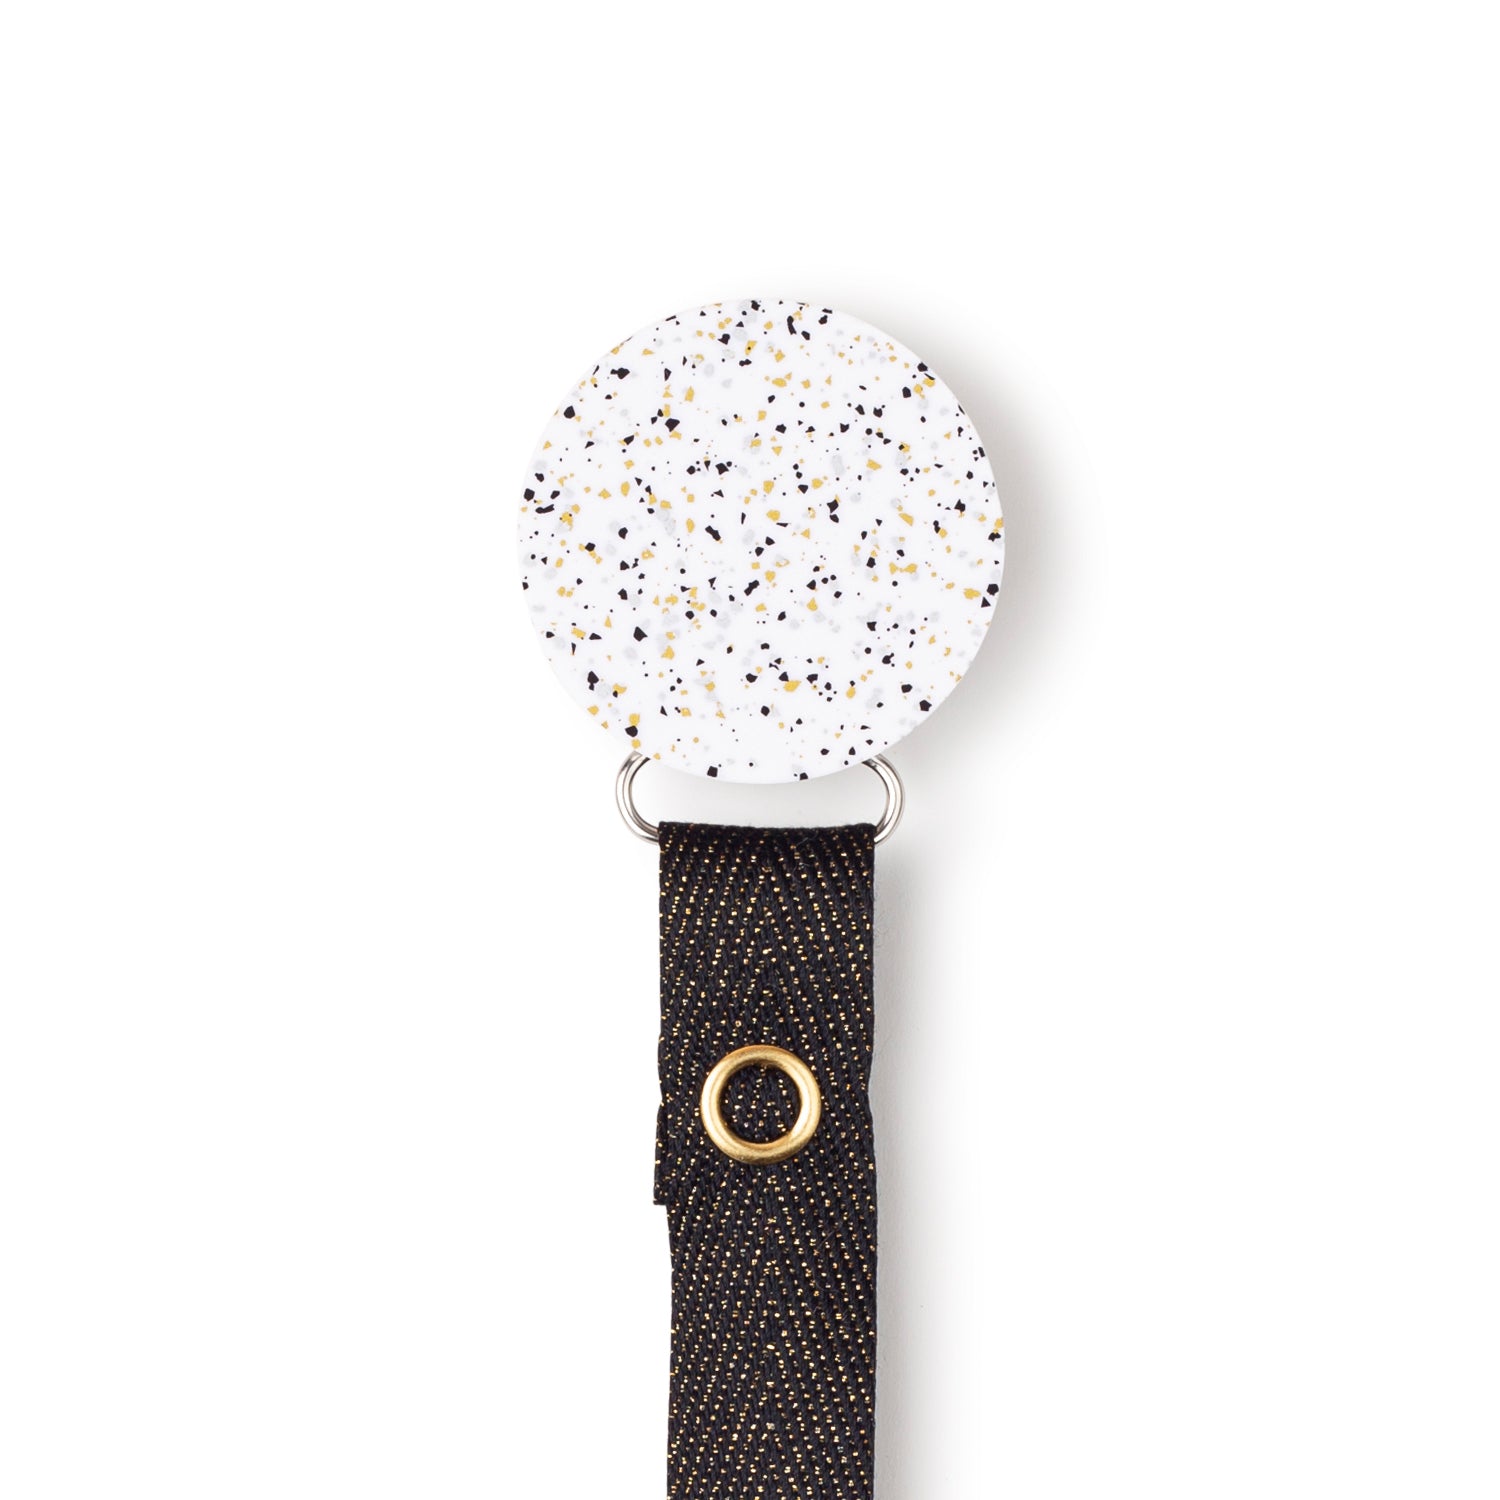 Classy Paci Speckled metallic gold black silver circle pacifier clip